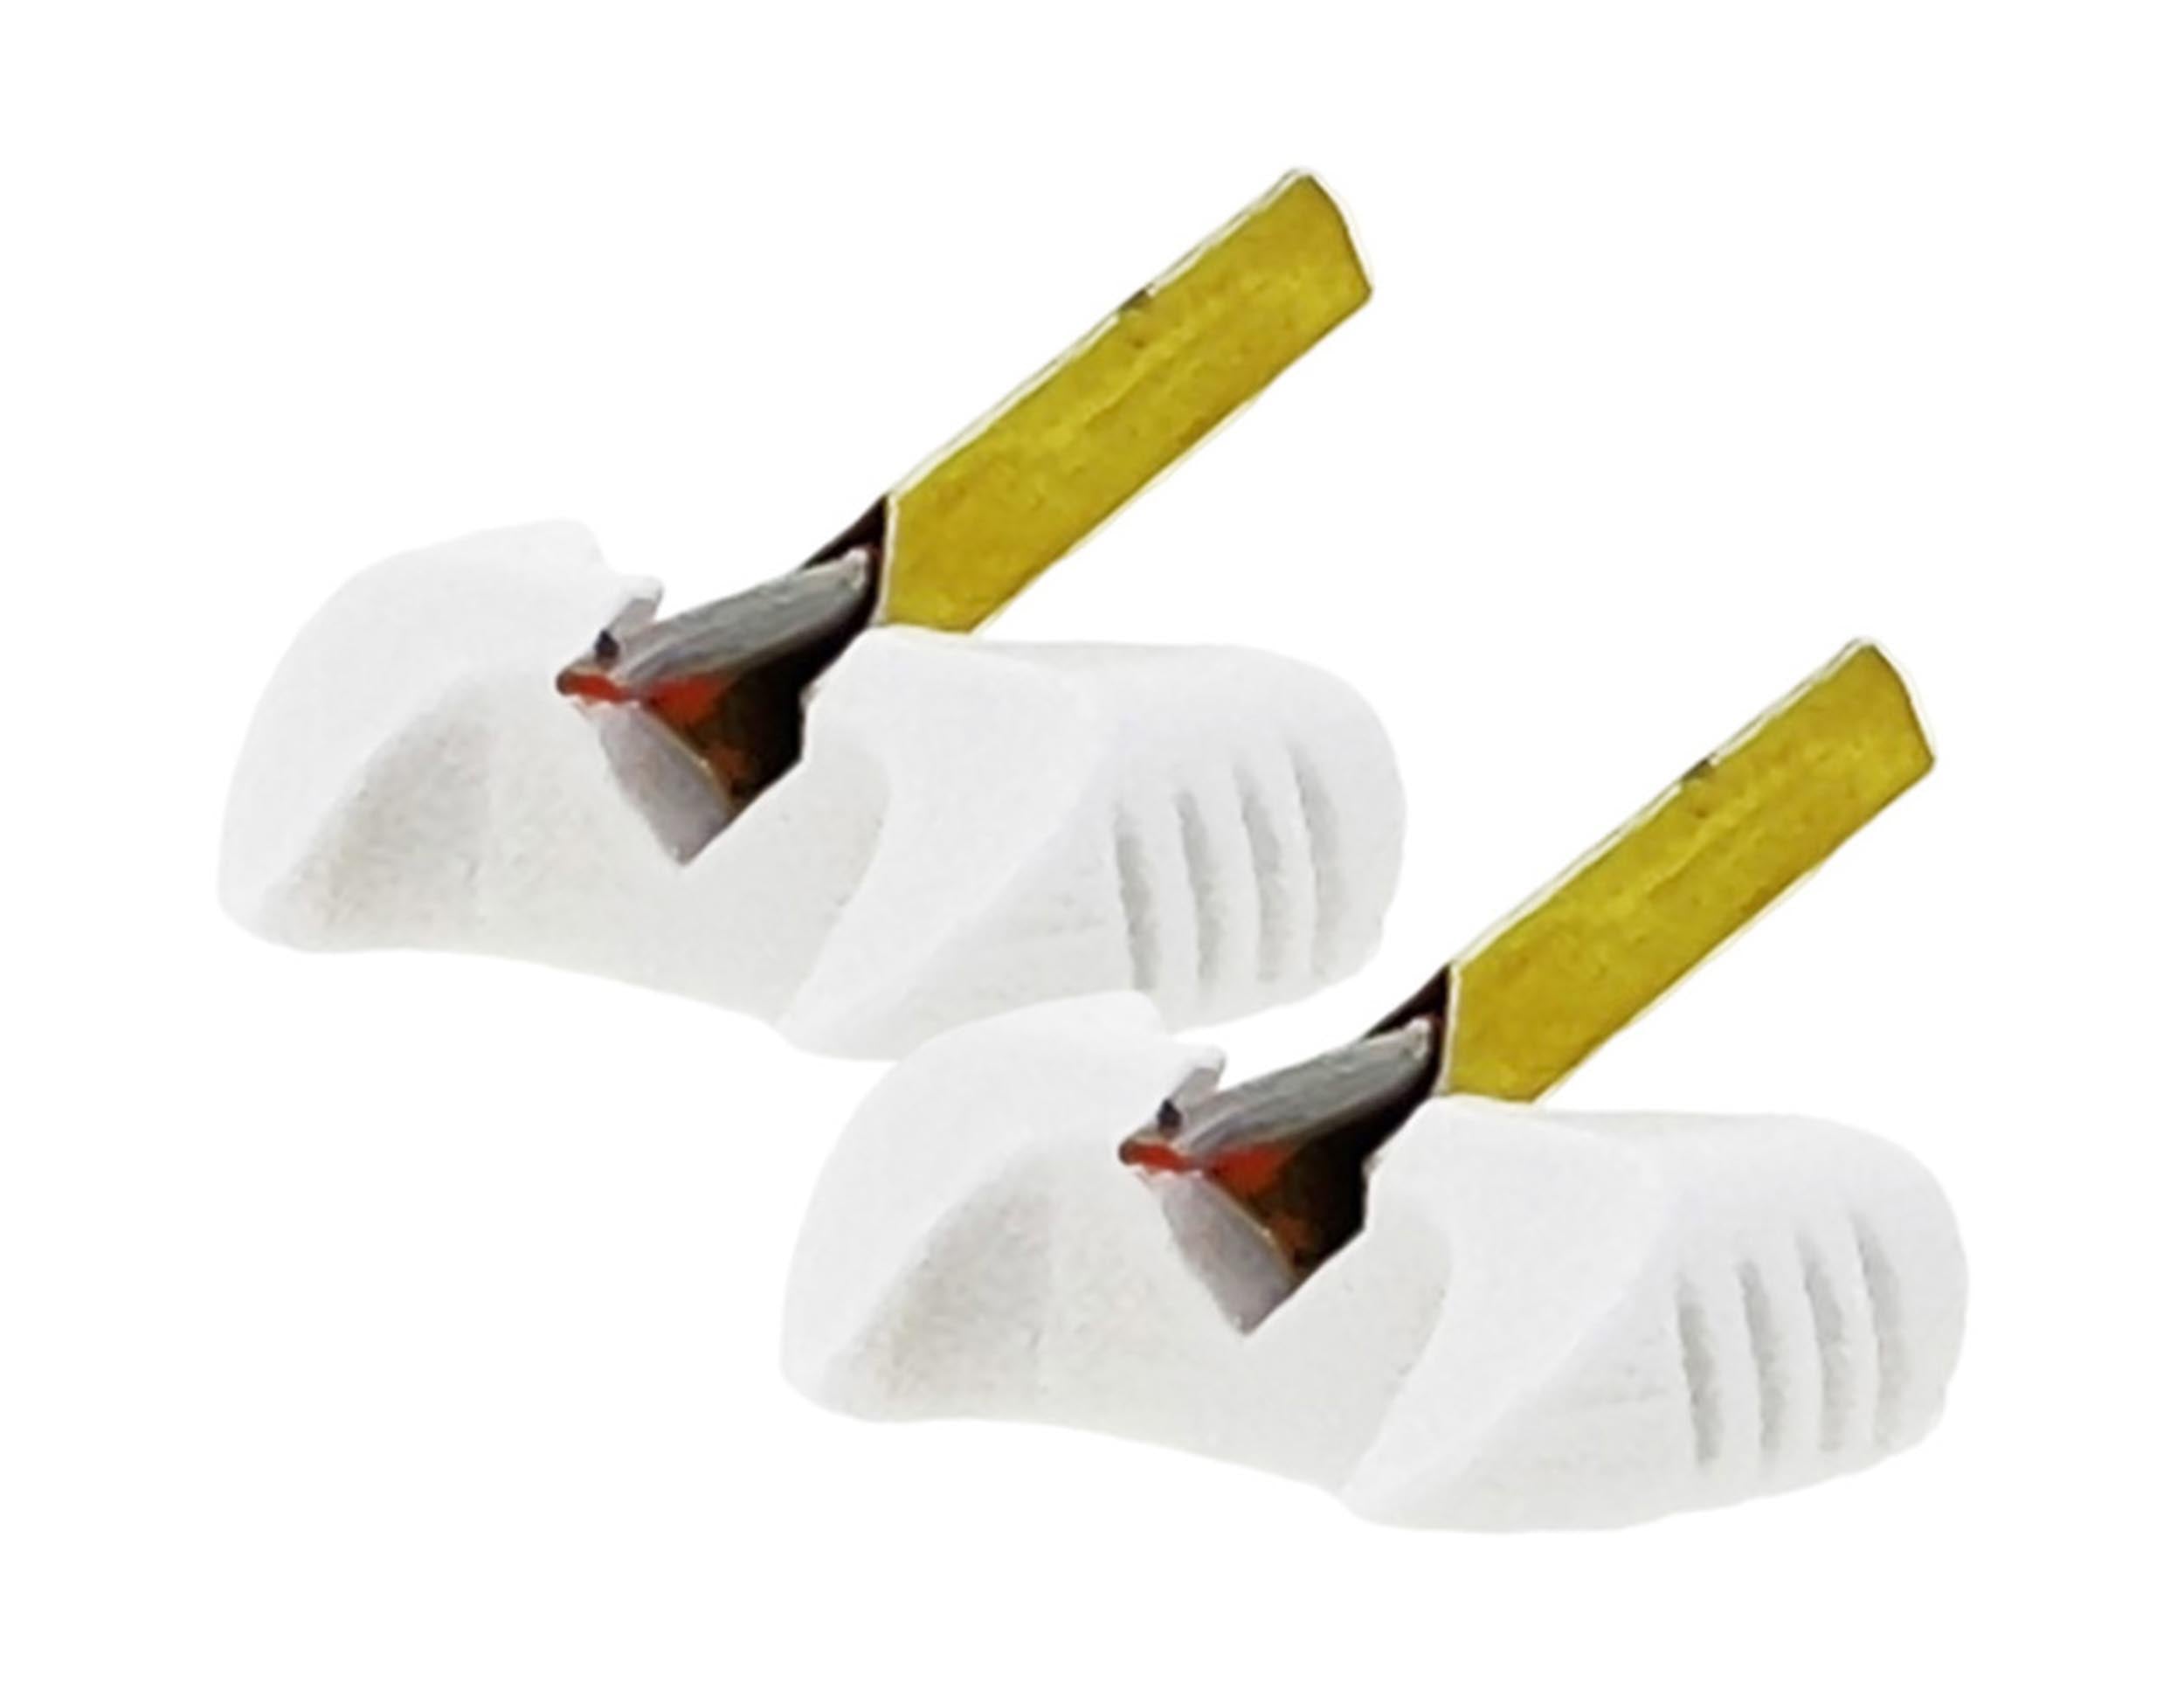 Jico J-AAC0783, 2-Pack replacement styli for the Shure White Label Cartridge by Jico